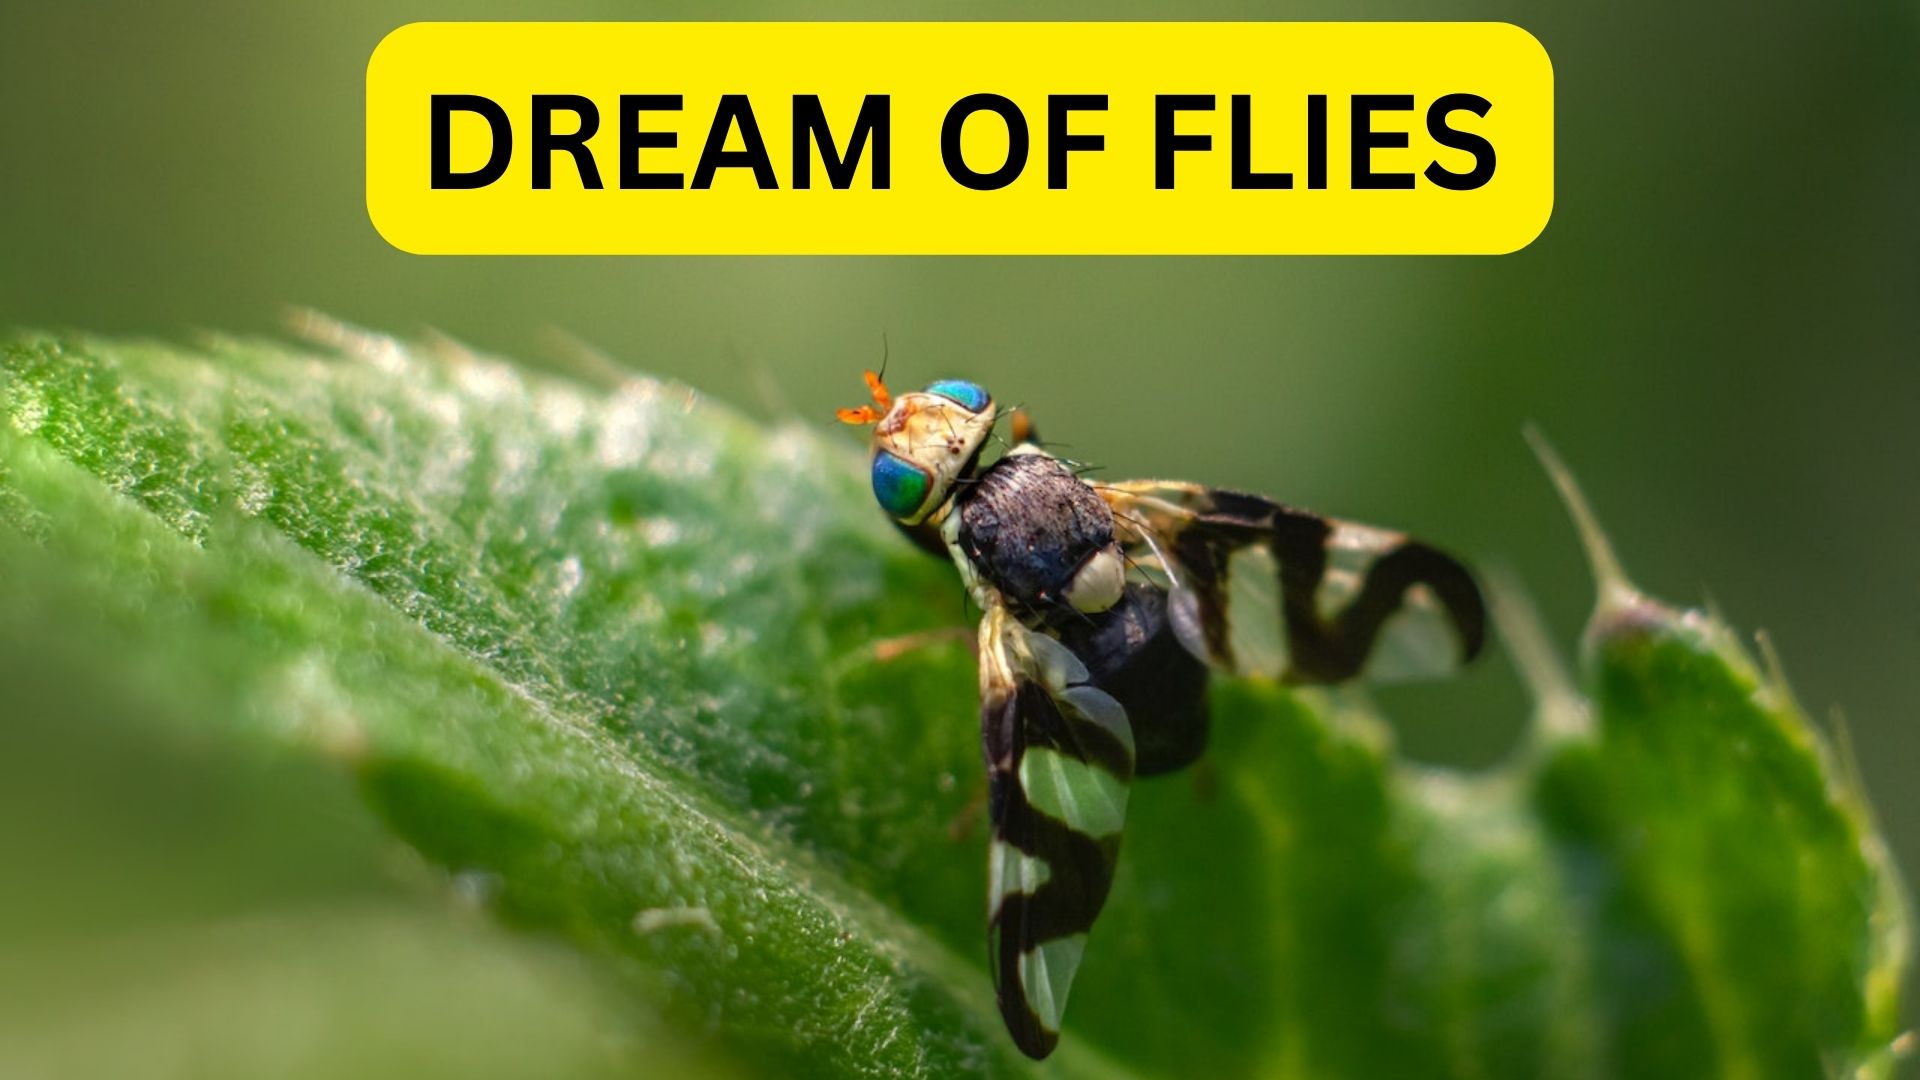 Dream Of Flies - Hardwork And Effort Will Fall Through